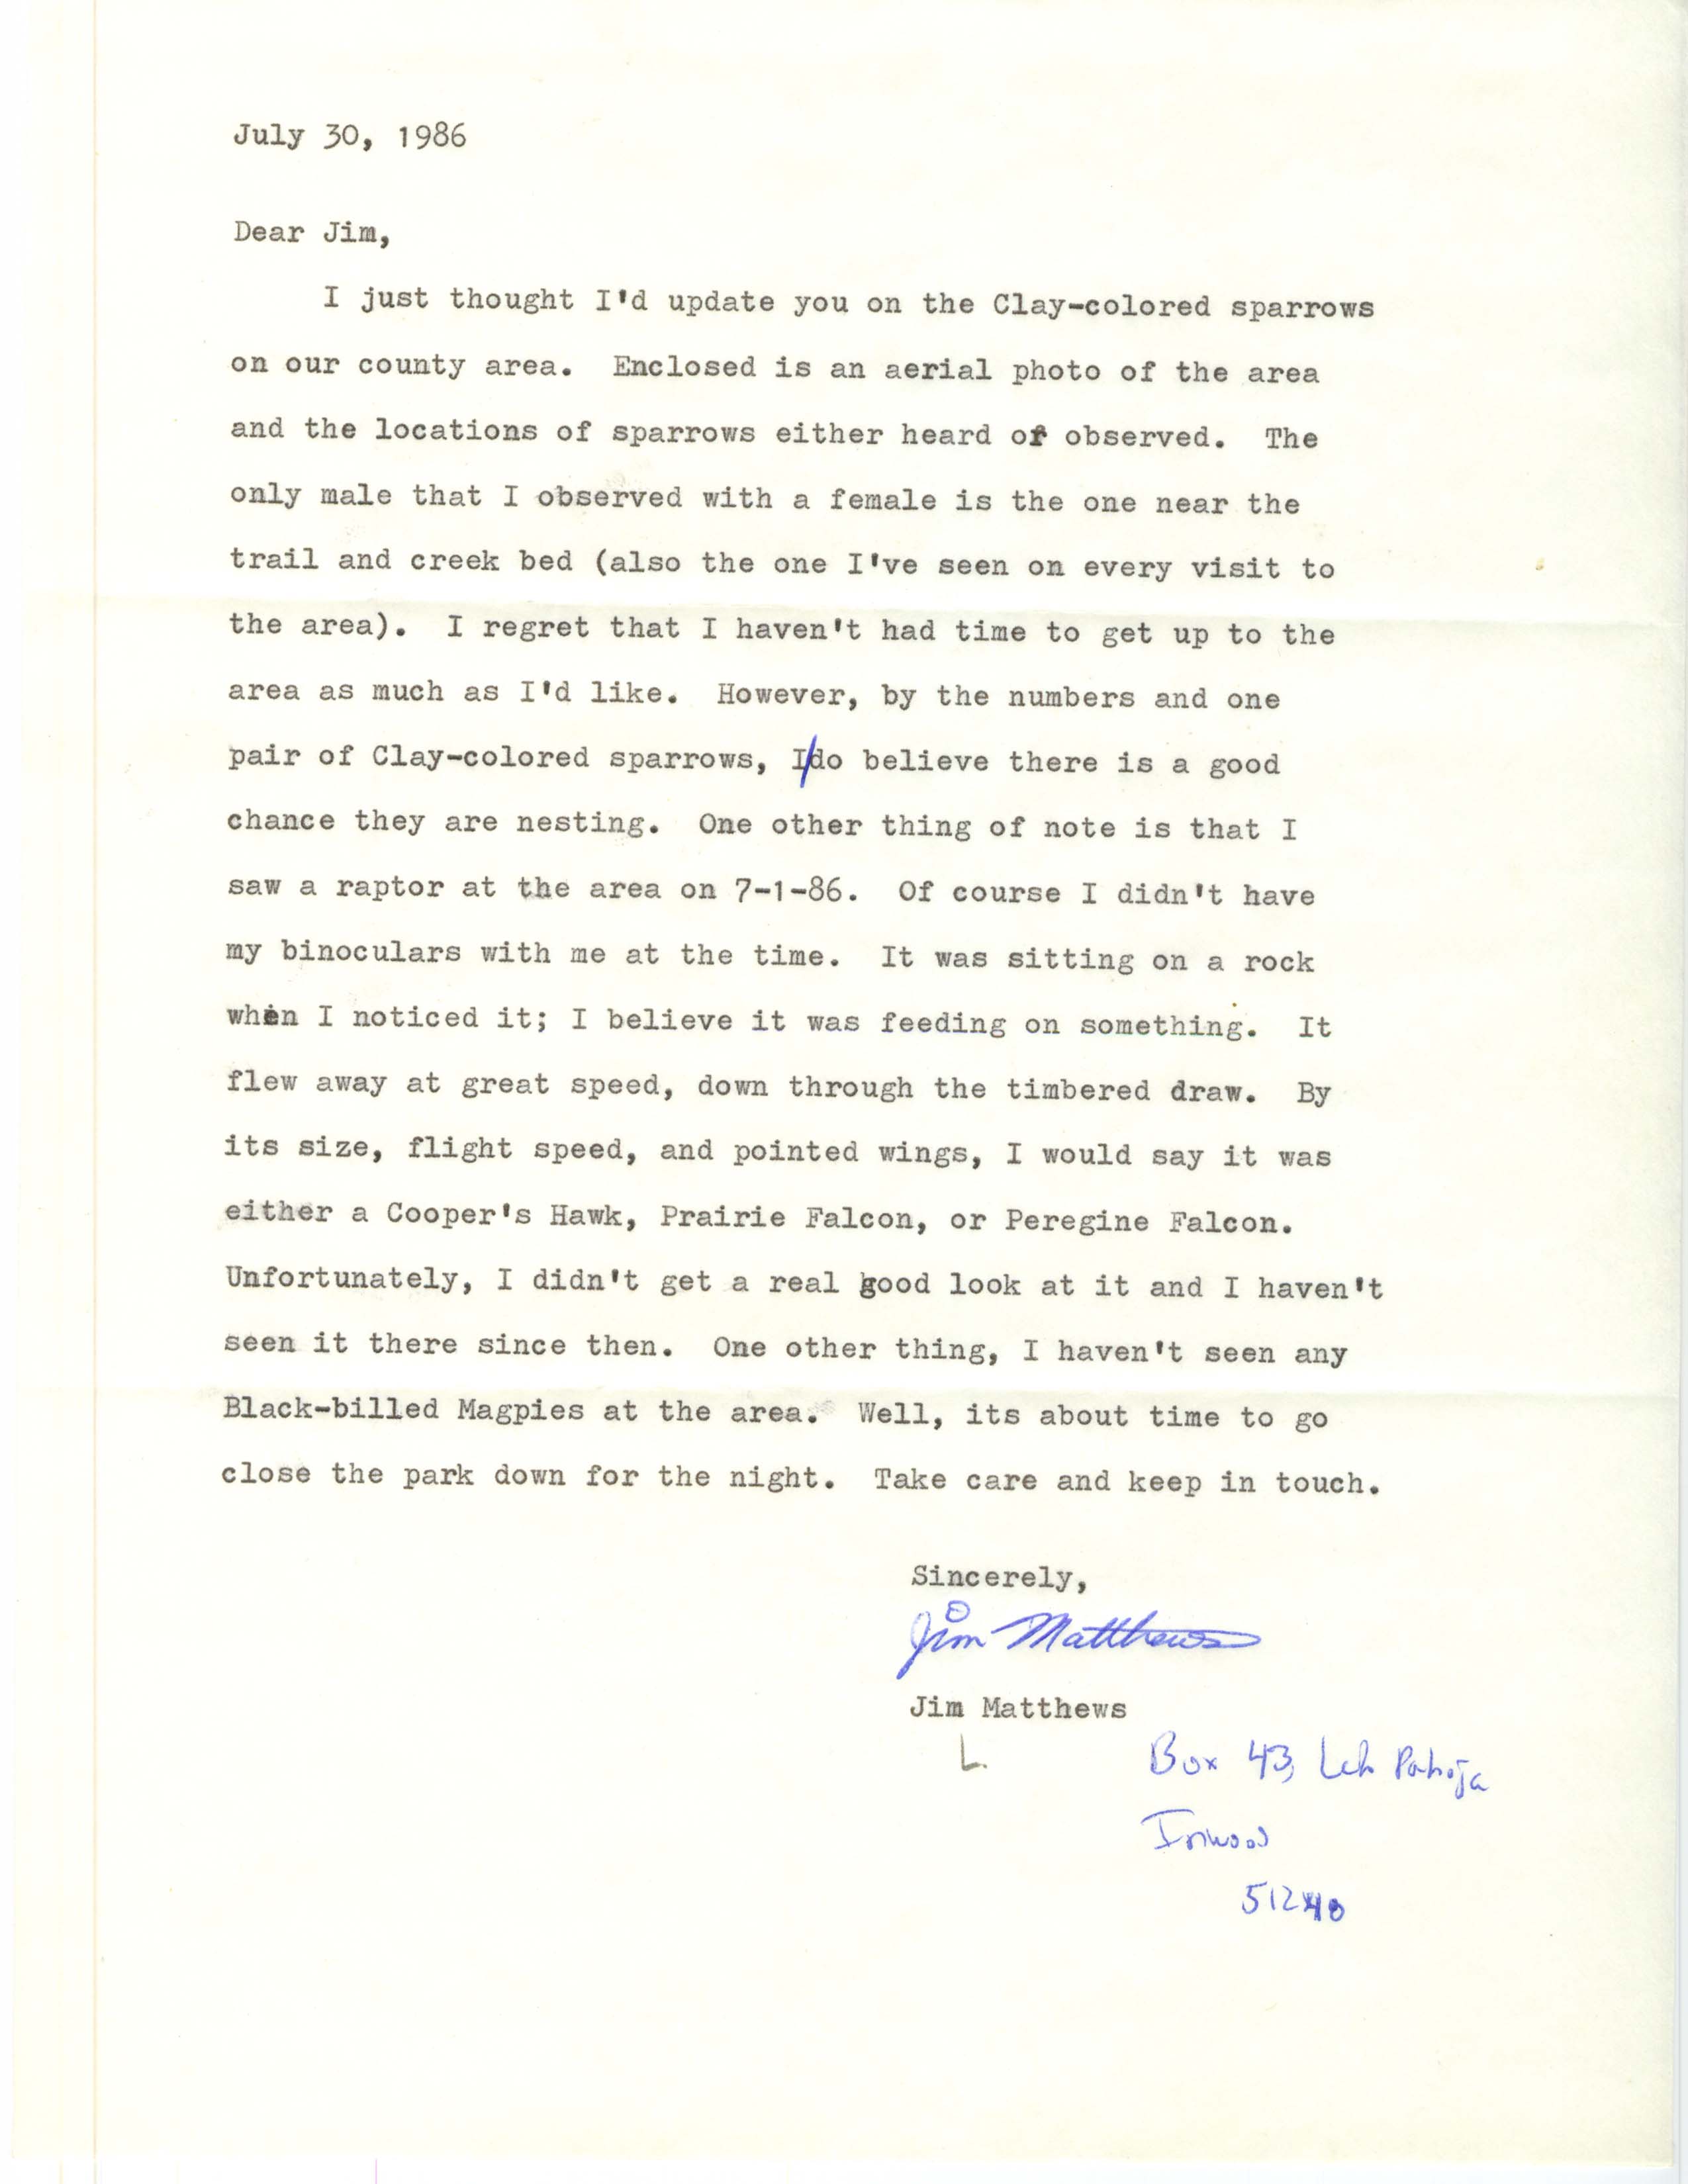 Jim Matthews letter to Jim Dinsmore regarding Clay-colored Sparrow sightings in Lyon County, July 30, 1986